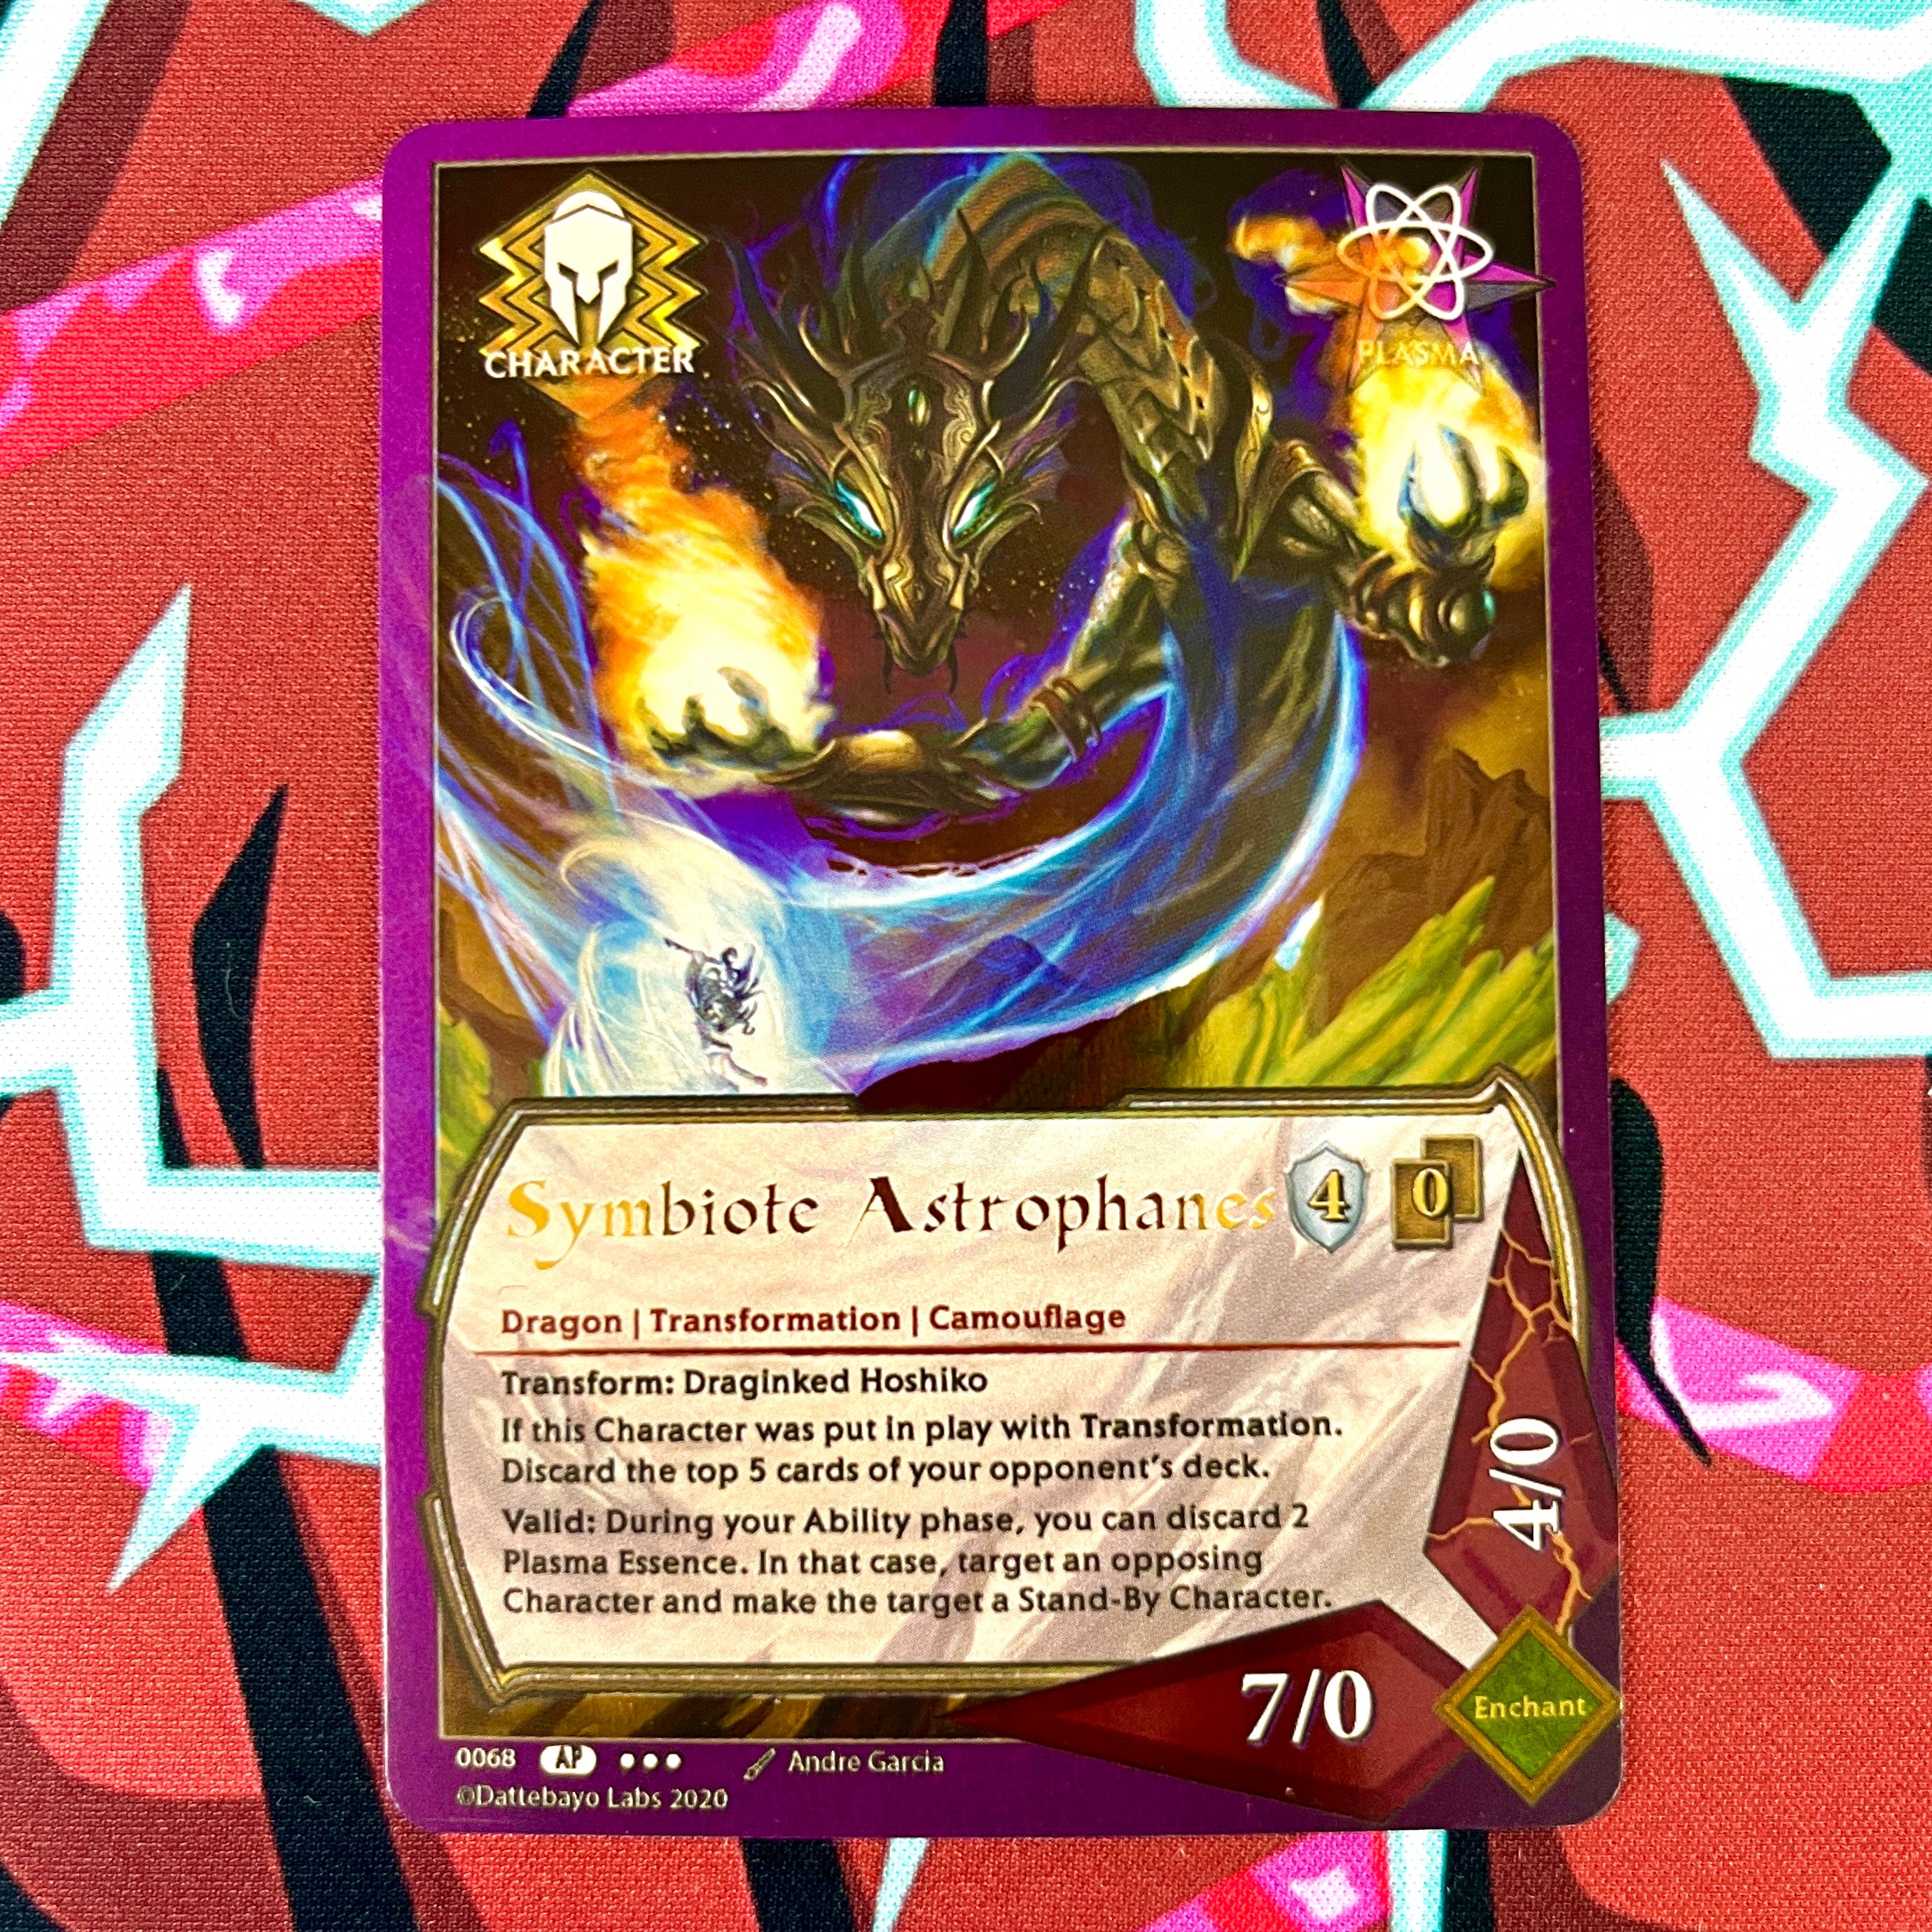 Symbiote Astrophanes - 0th Edition Gold Foil